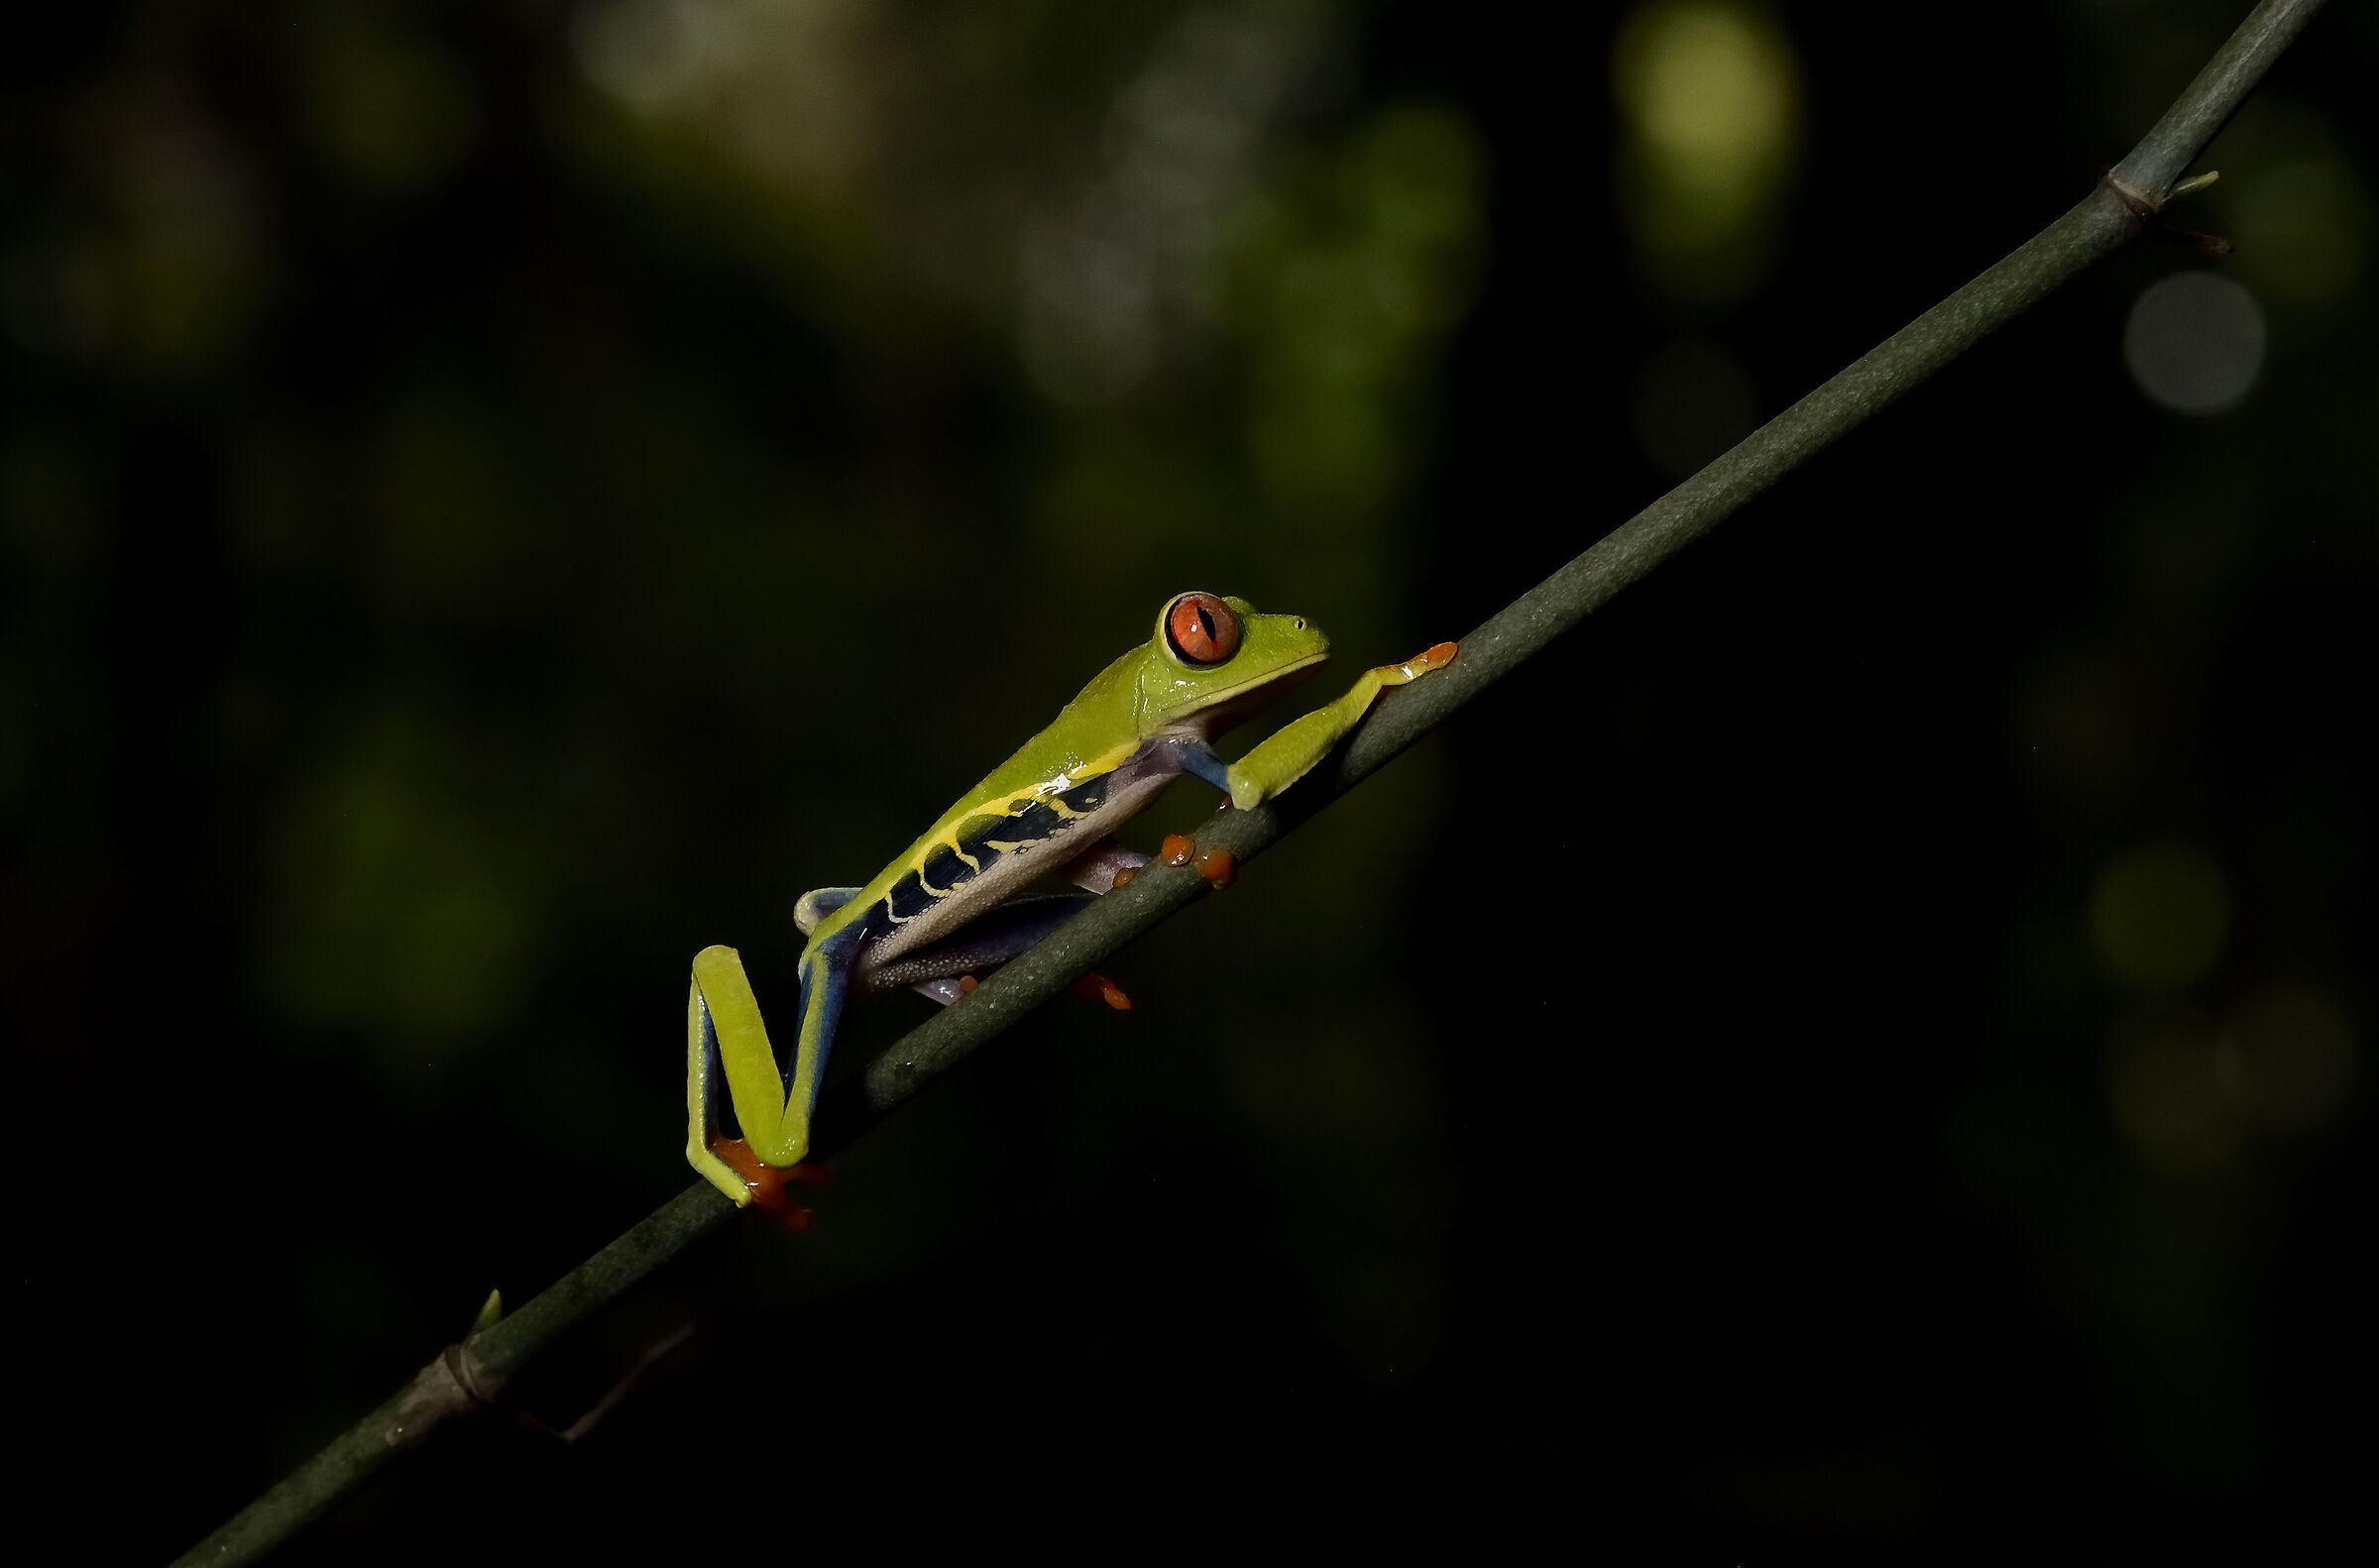 The magnificent and iconic Red-eye three frog ...